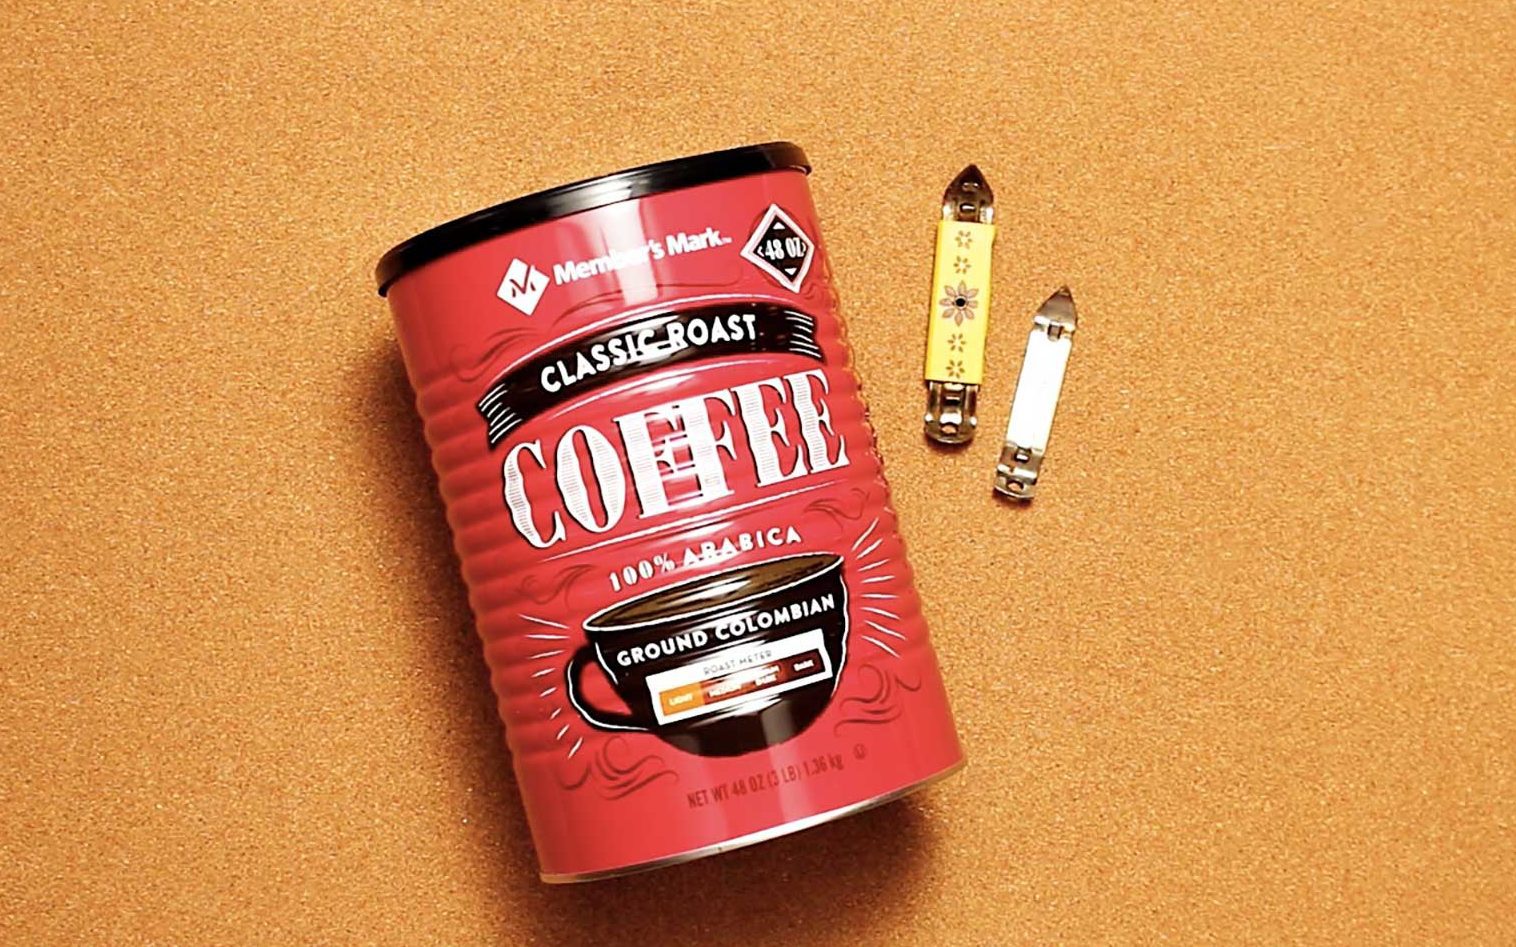 Two small can openers and a coffee can resting on cork colored background.